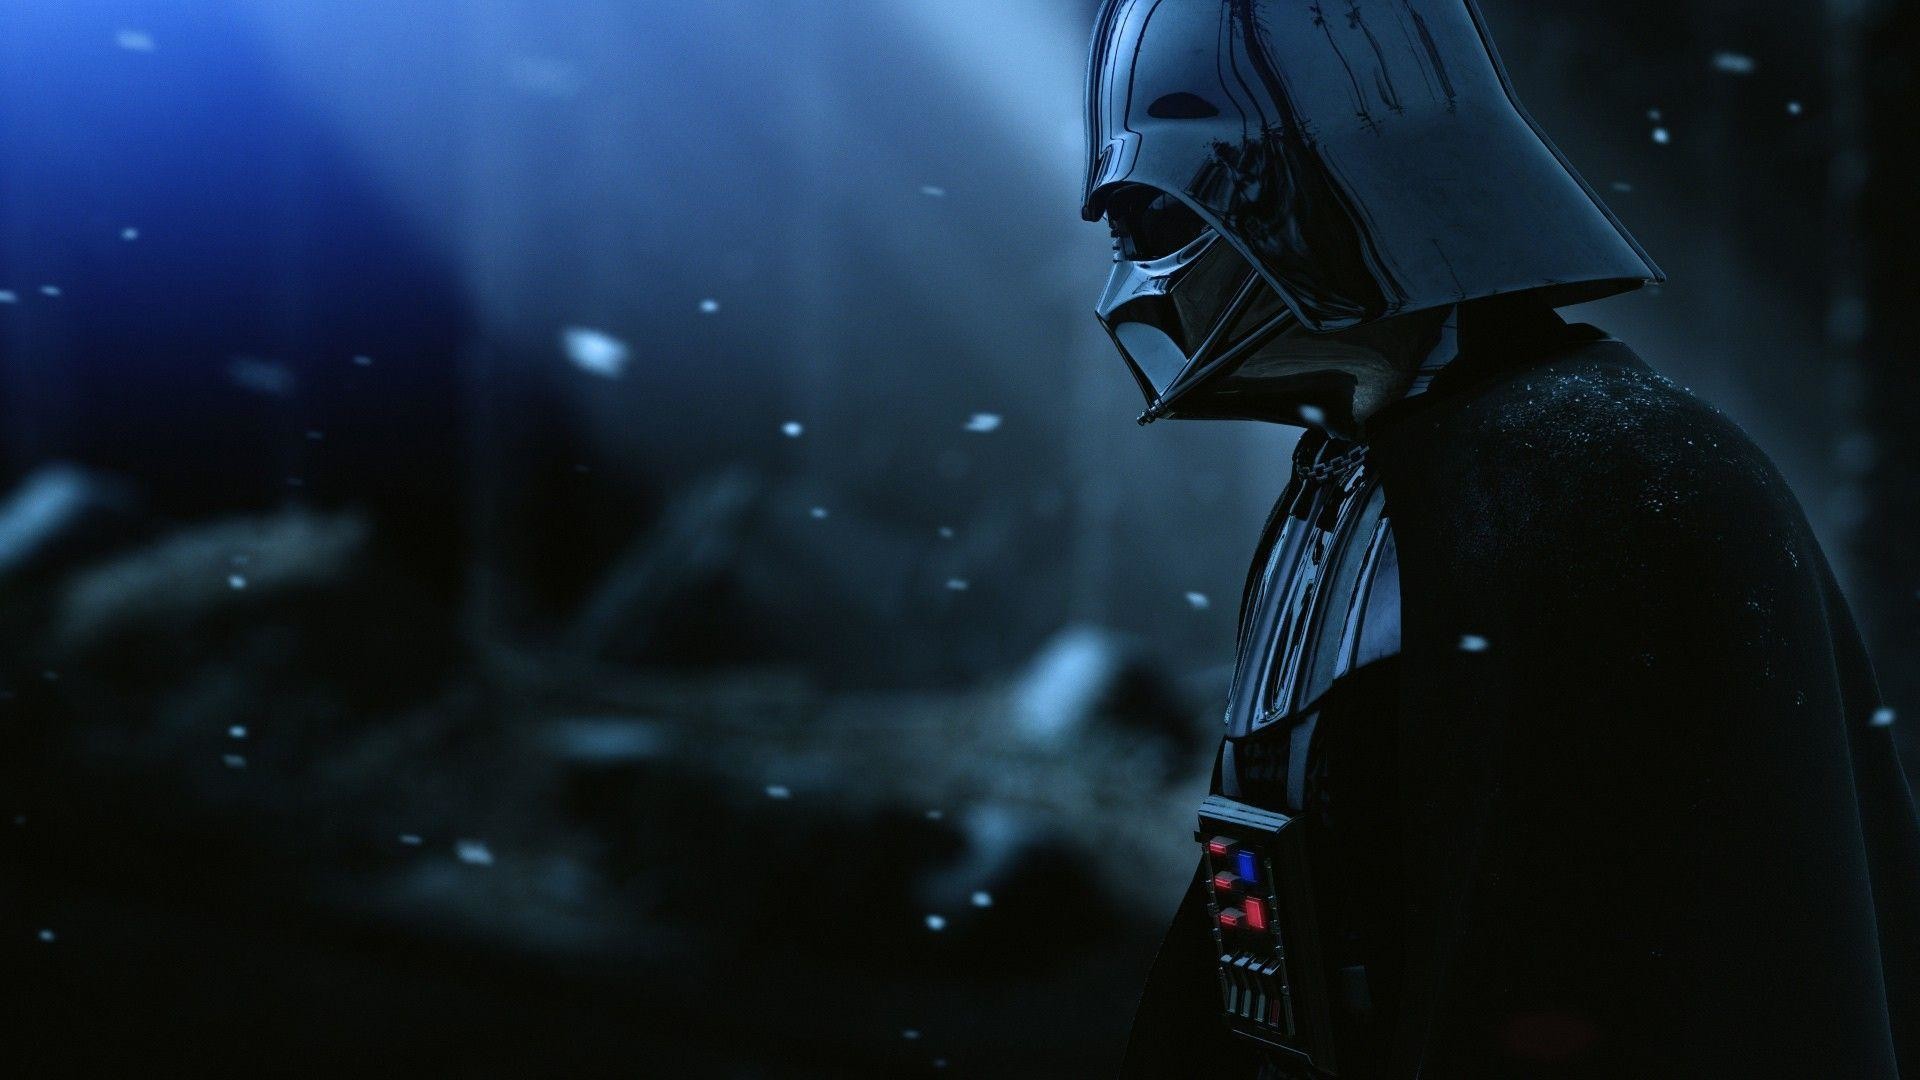 Star Wars Wallpaper 1080p 79 Pictures